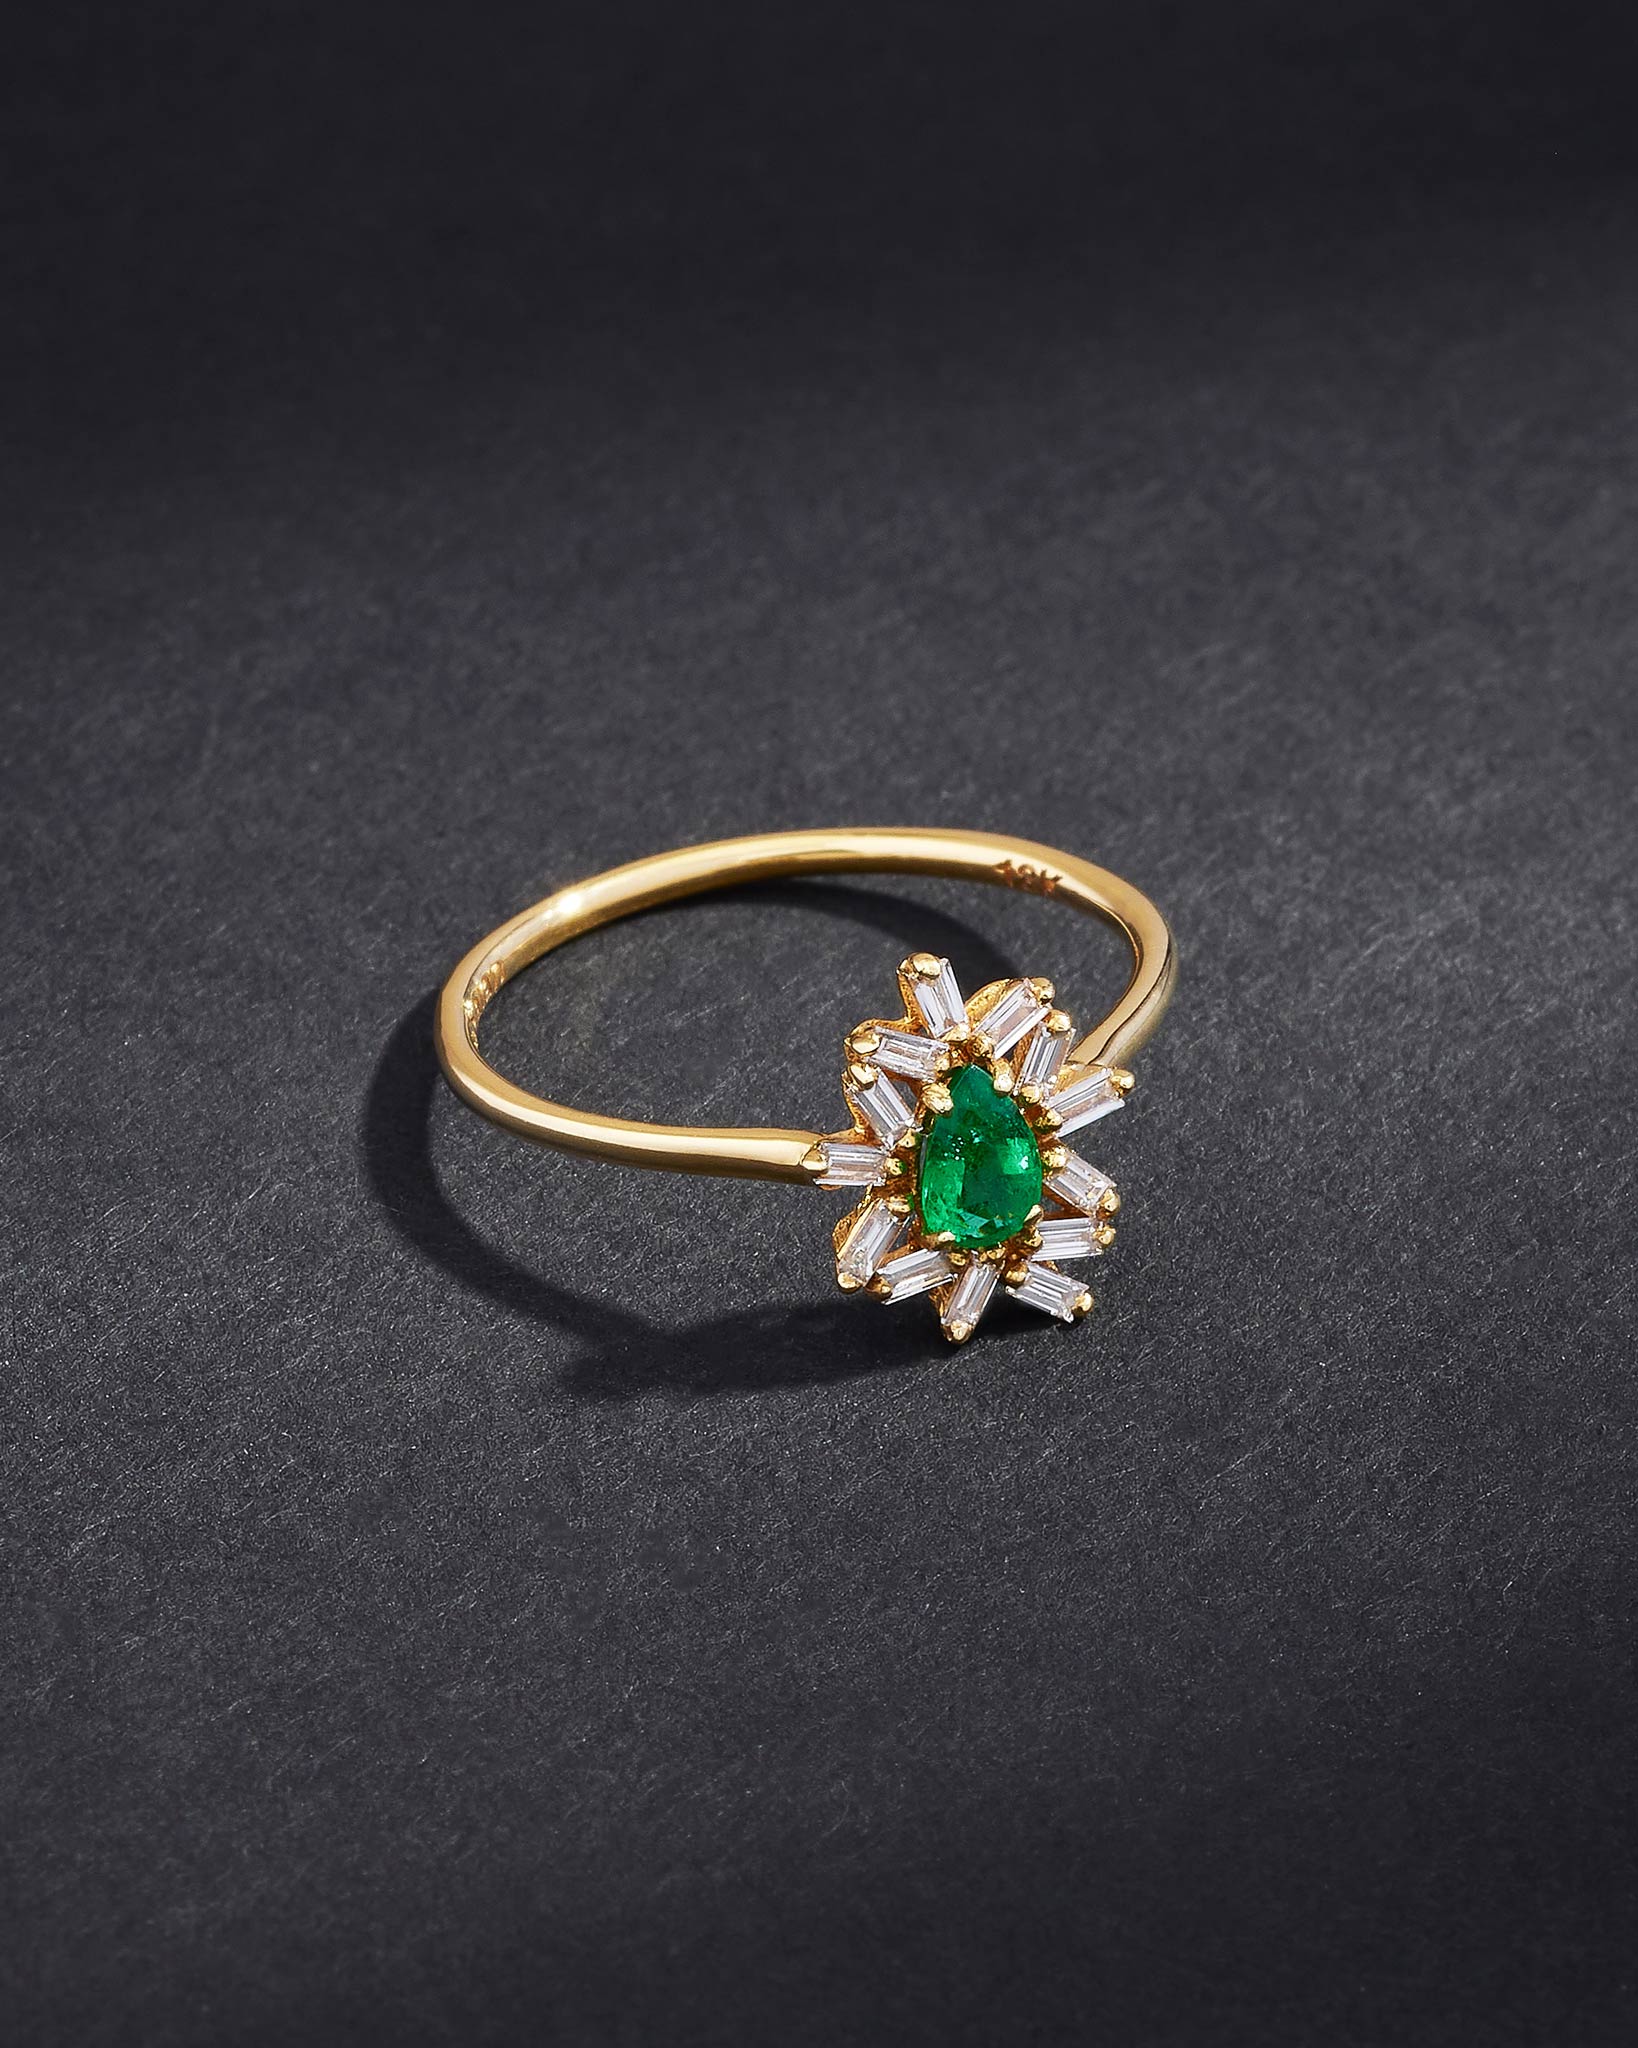 Suzanne Kalan One of a Kind Pear Shaped Emerald and Baguette Diamond Ring in 18k yellow gold